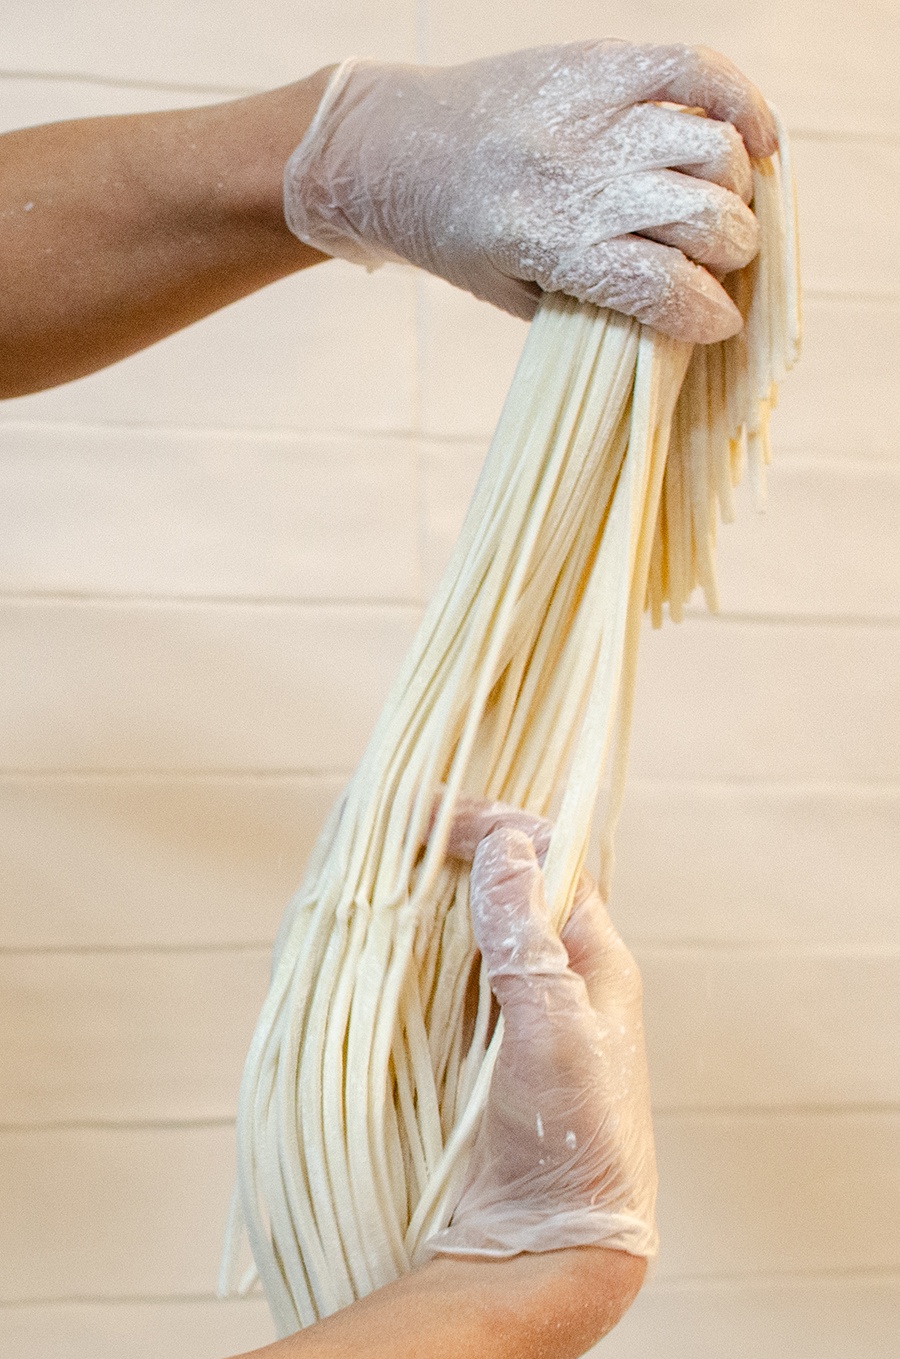 Two gloved hands hold a batch of freshly cut udon noodles.